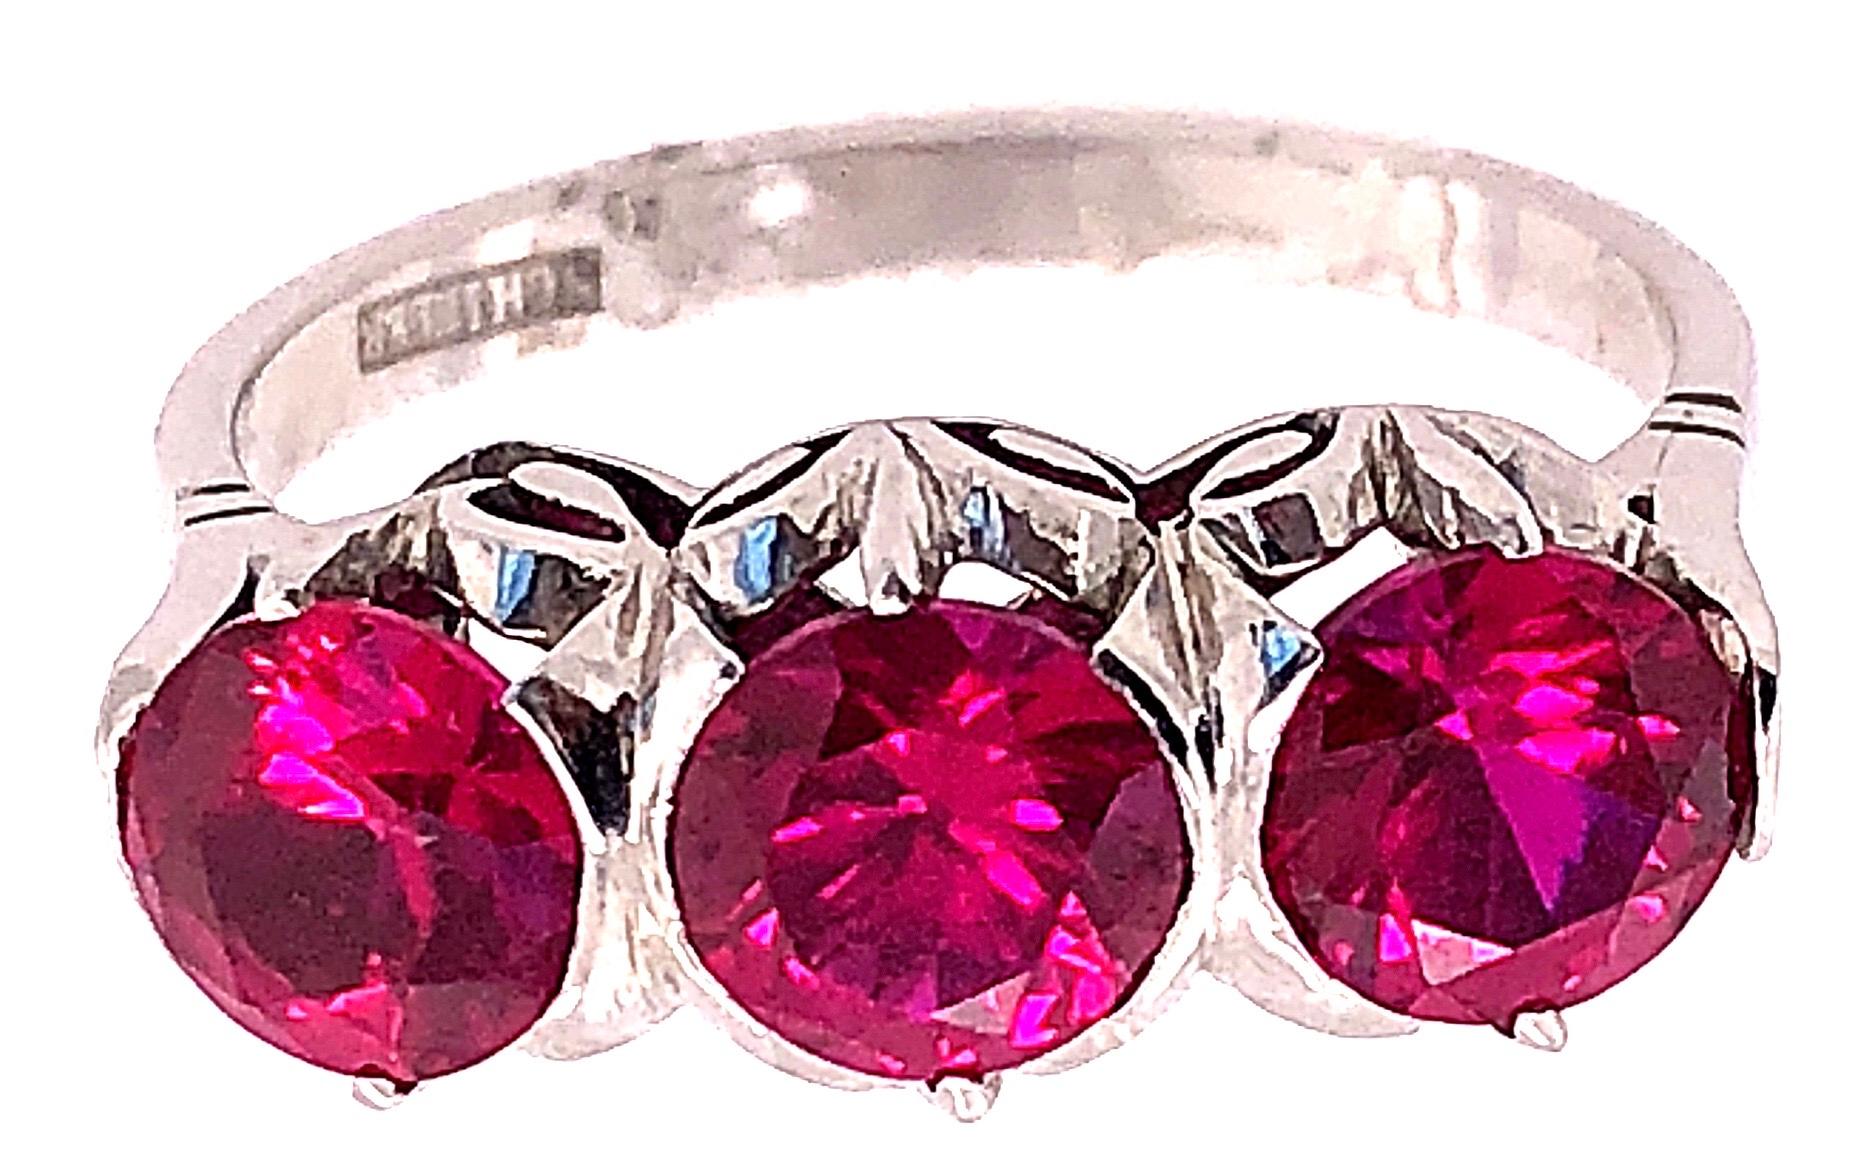 14 Karat White Gold Contemporary Ruby Ring Schiller Stamped.
Size 9.
3 piece ruby 6.00 mm x 6.00 mm.
6 grams total weight.
7.98 ring height.